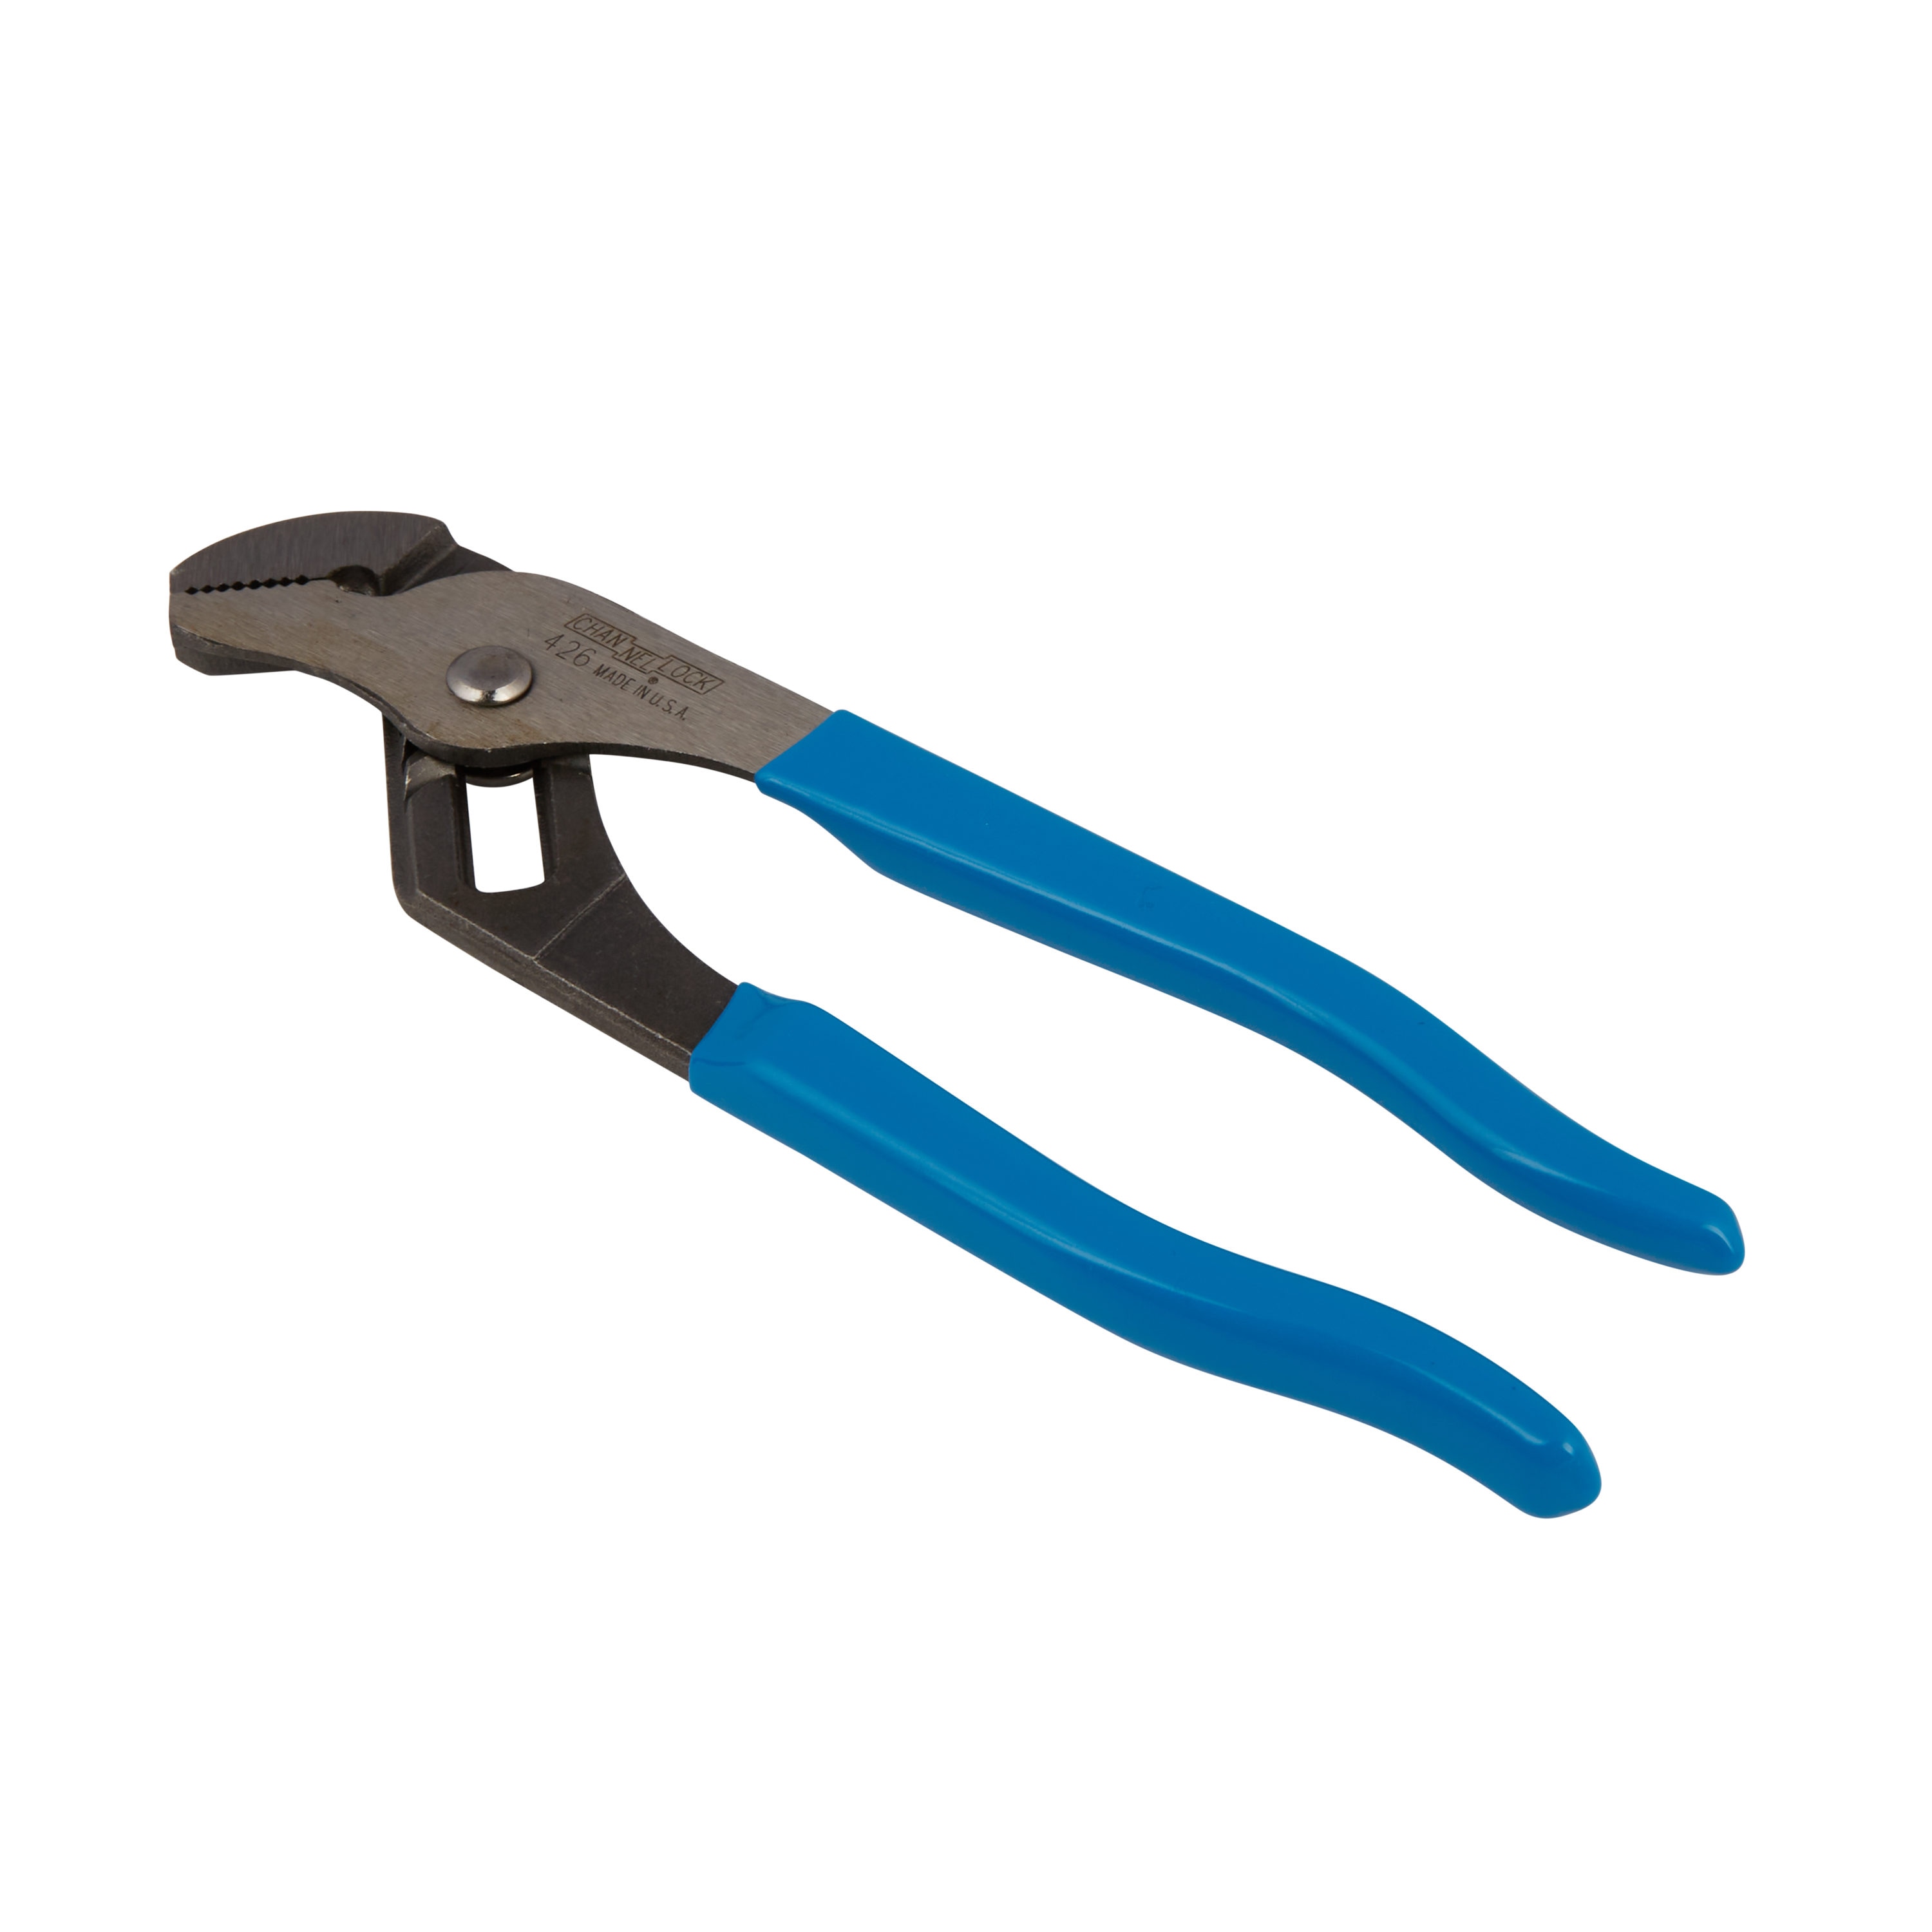 Channellock Tongue & Groove Pliers 426